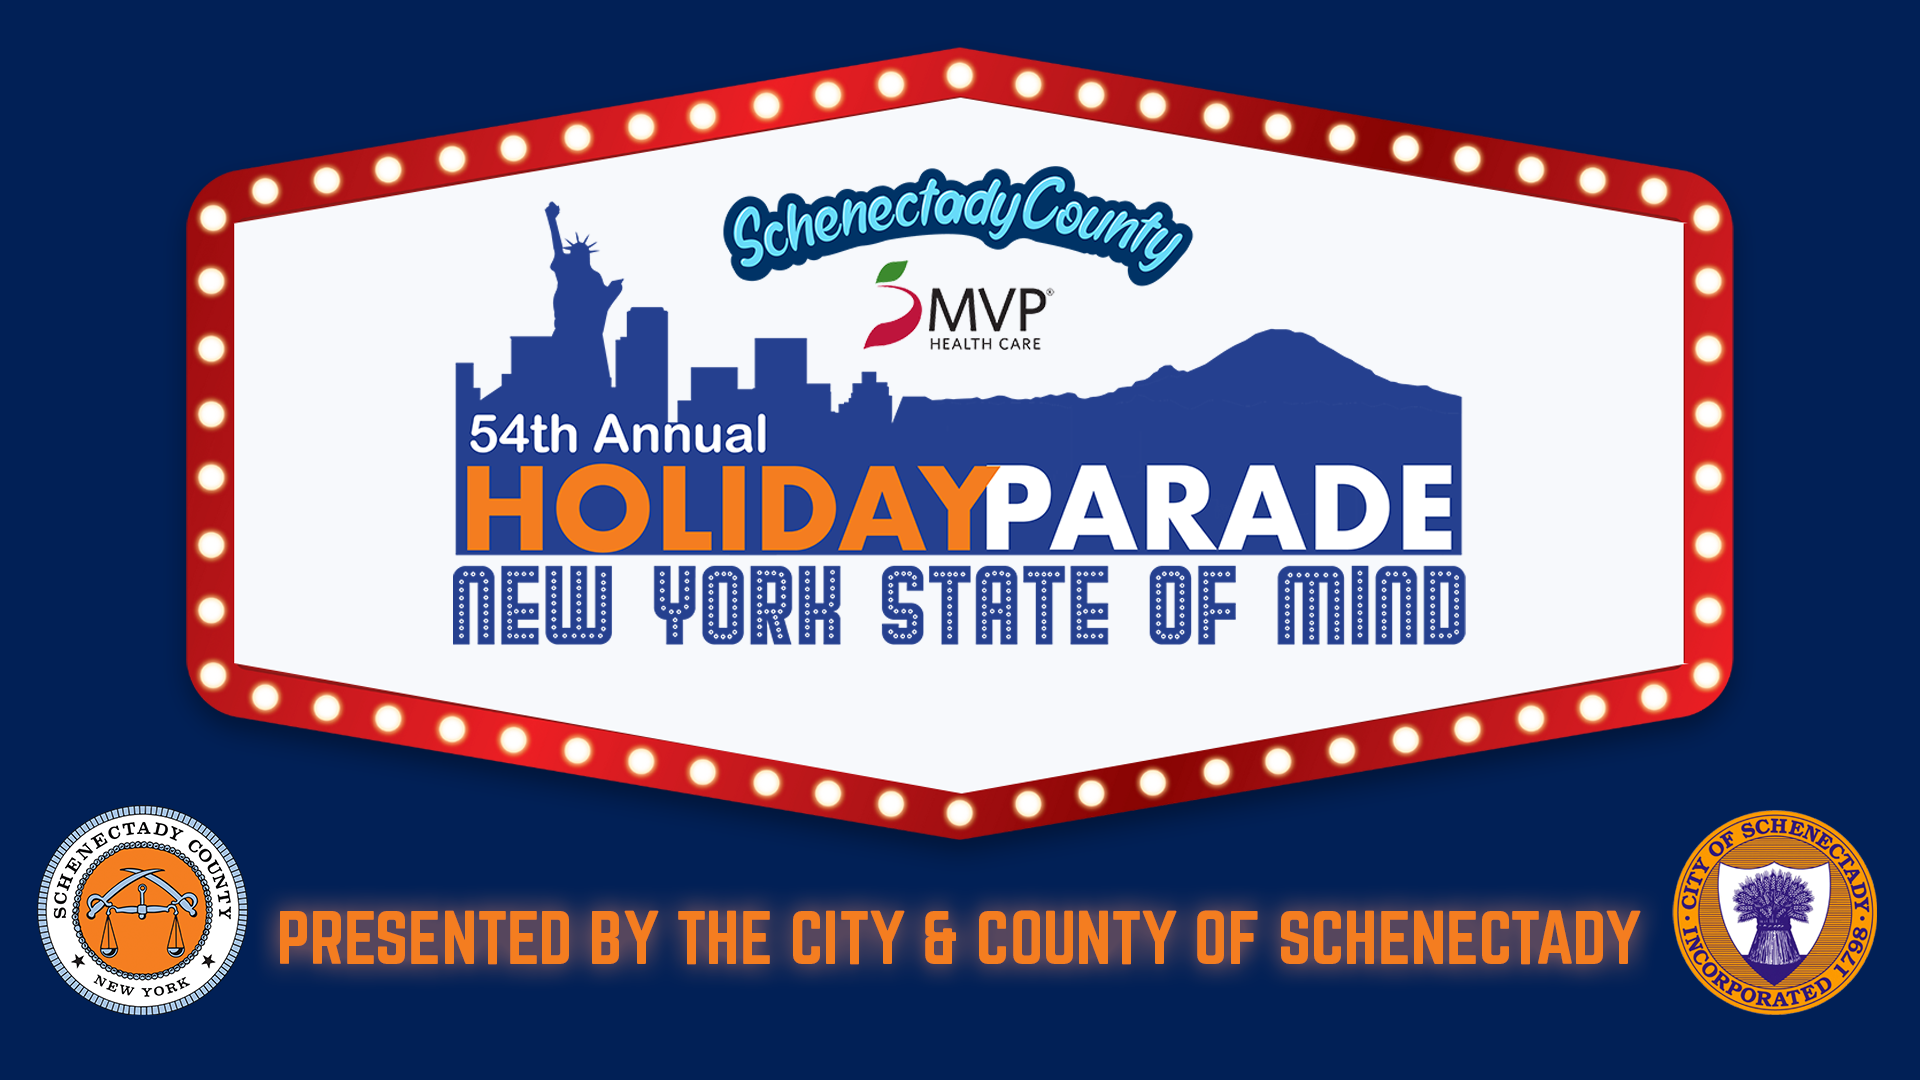 The 54th Annual Holiday Parade - New York State of Mind